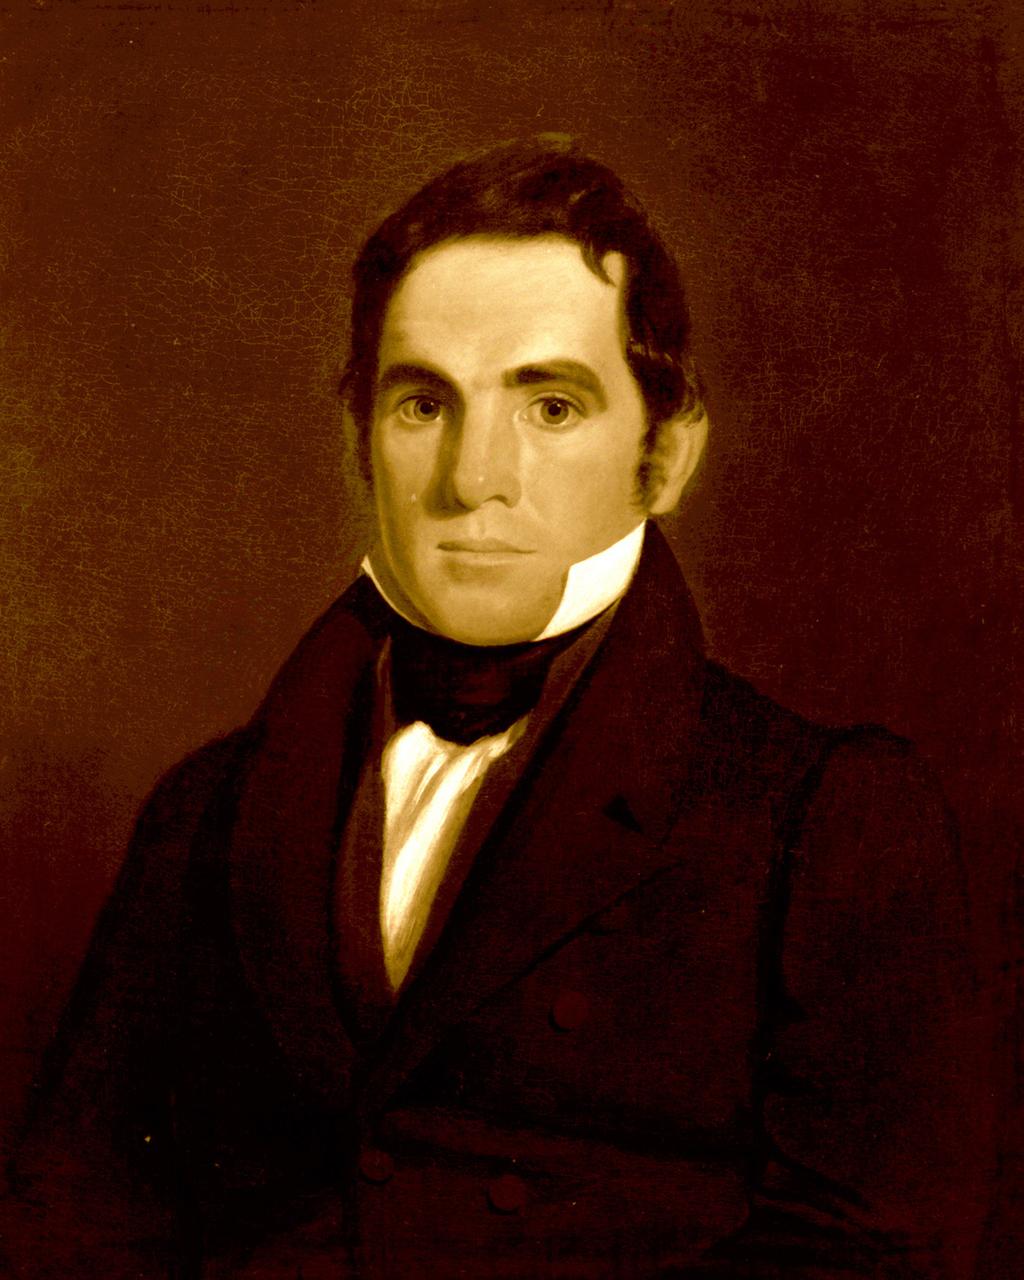 Love also served as the organist of the Unitarian Church and secretary of the Ladies Howard Society. Portrait of Robert F. Parker attributed to William Swain, c. 1835.